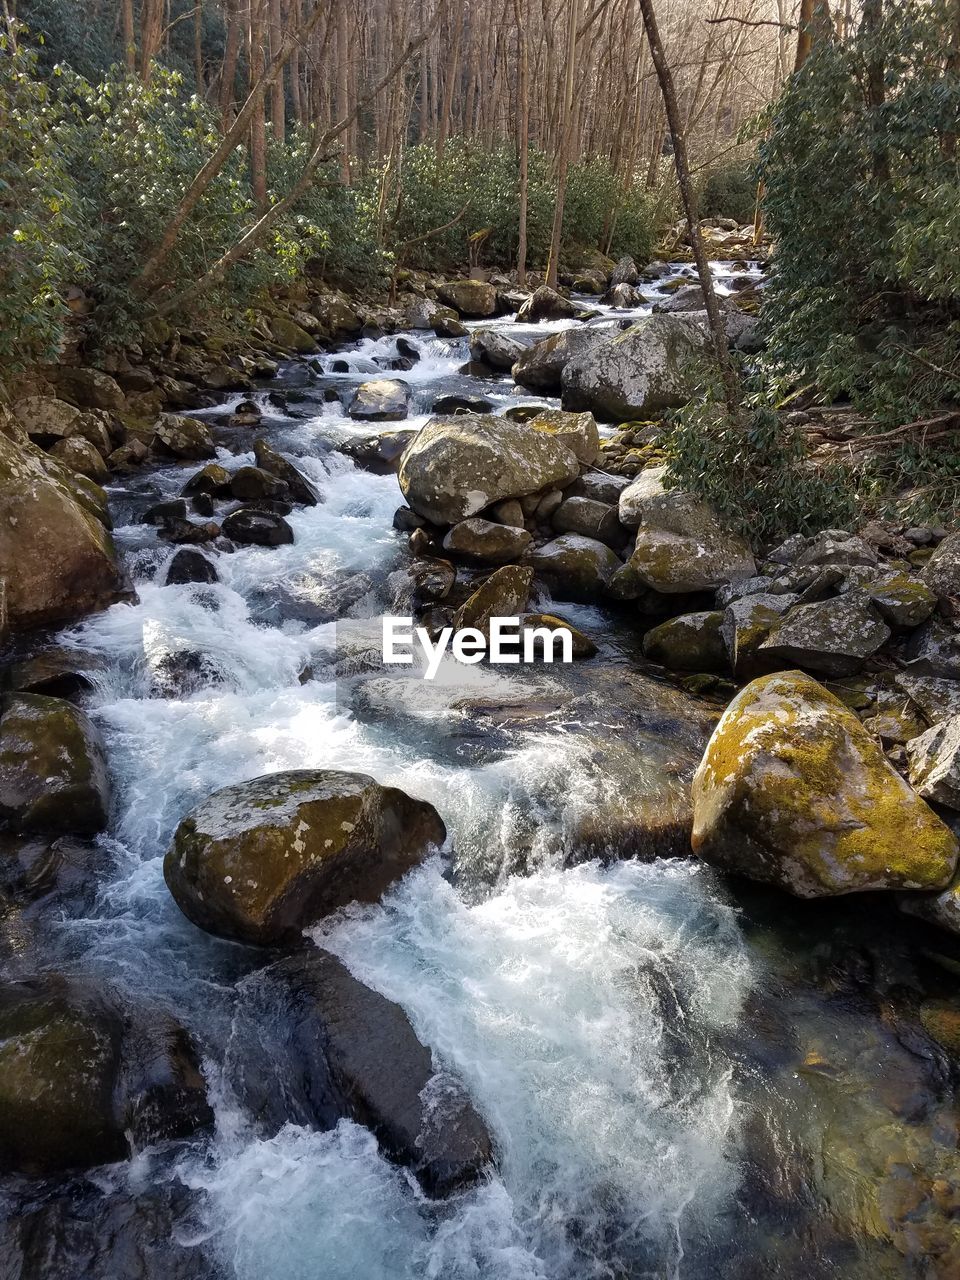 RIVER FLOWING IN FOREST